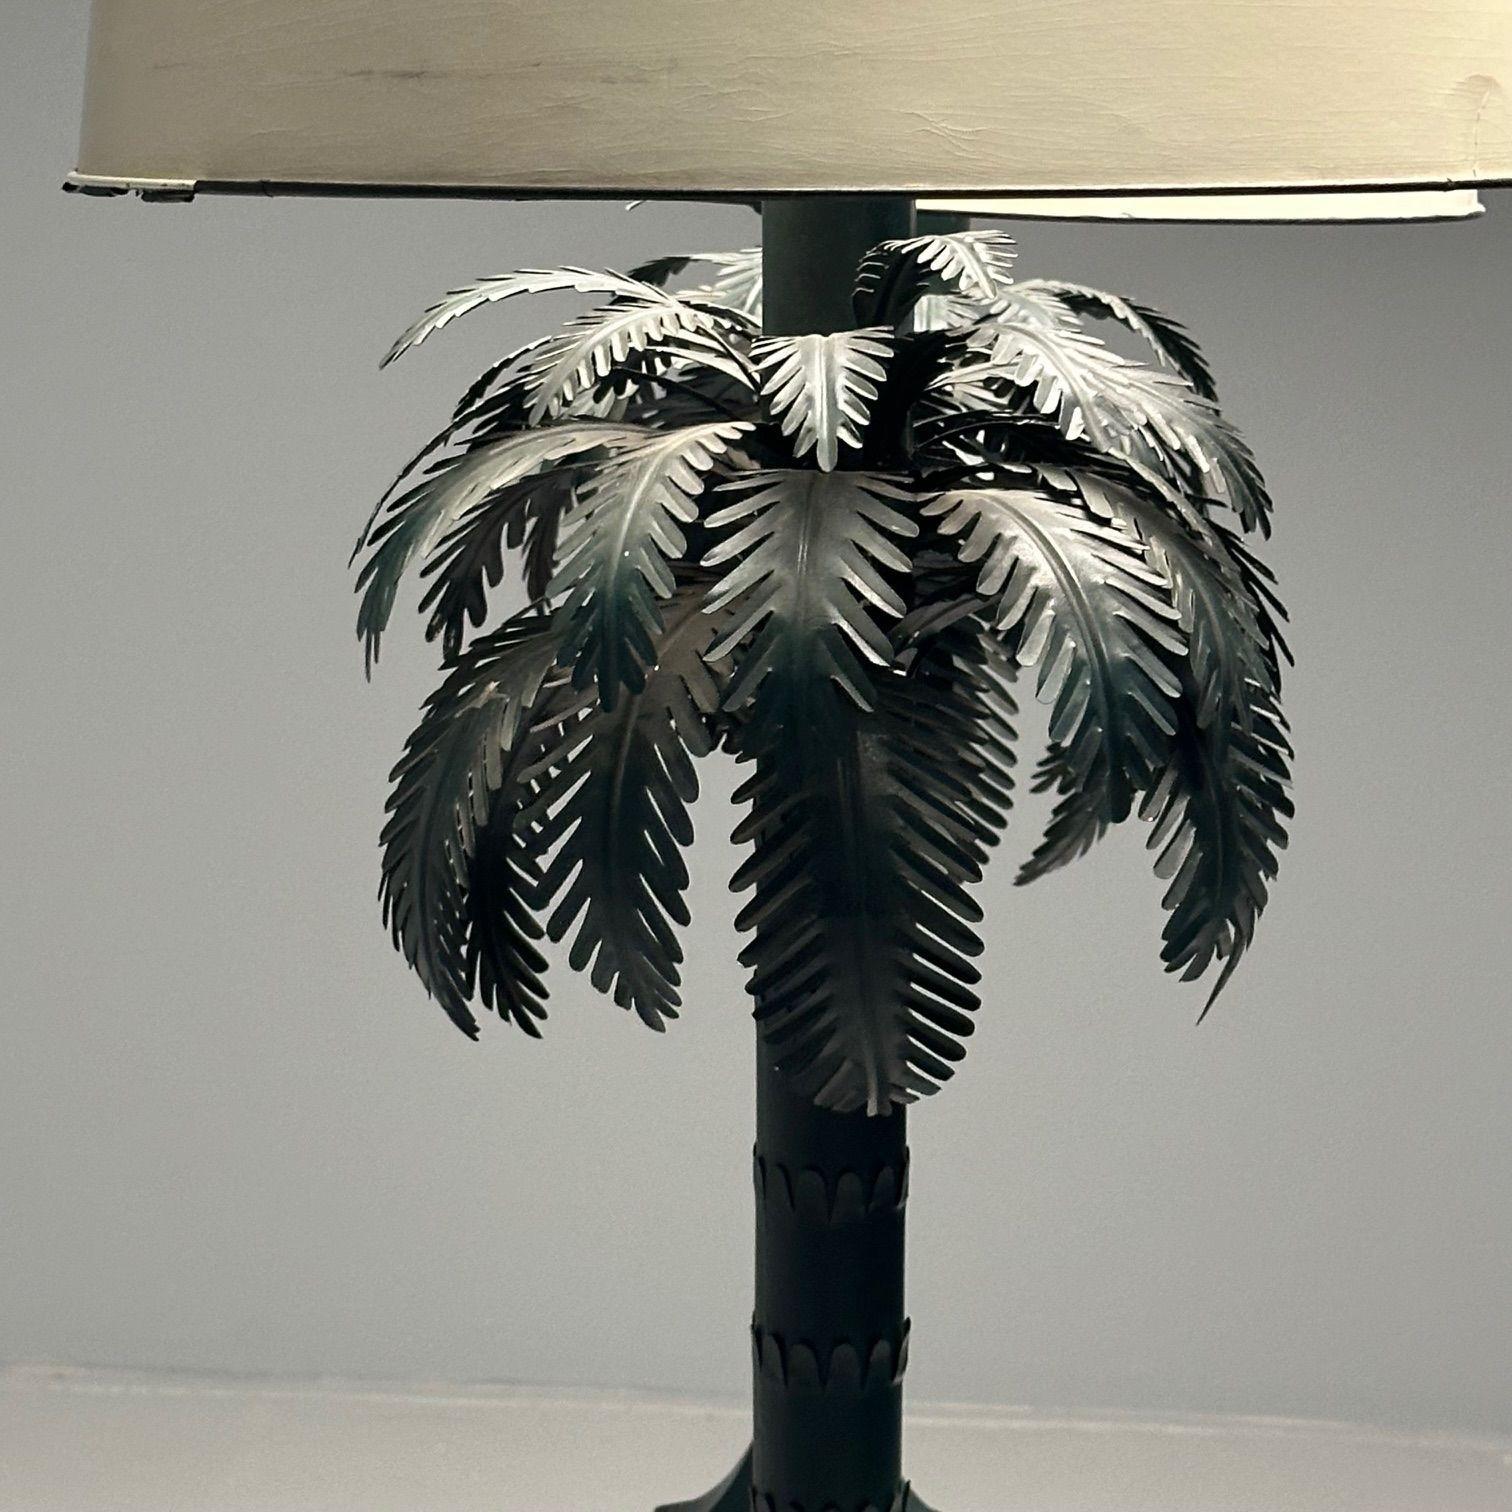 Maison Jansen Style, Mid-Century Modern, Palm Tree Lamps, Green, Metal, 1970s For Sale 11